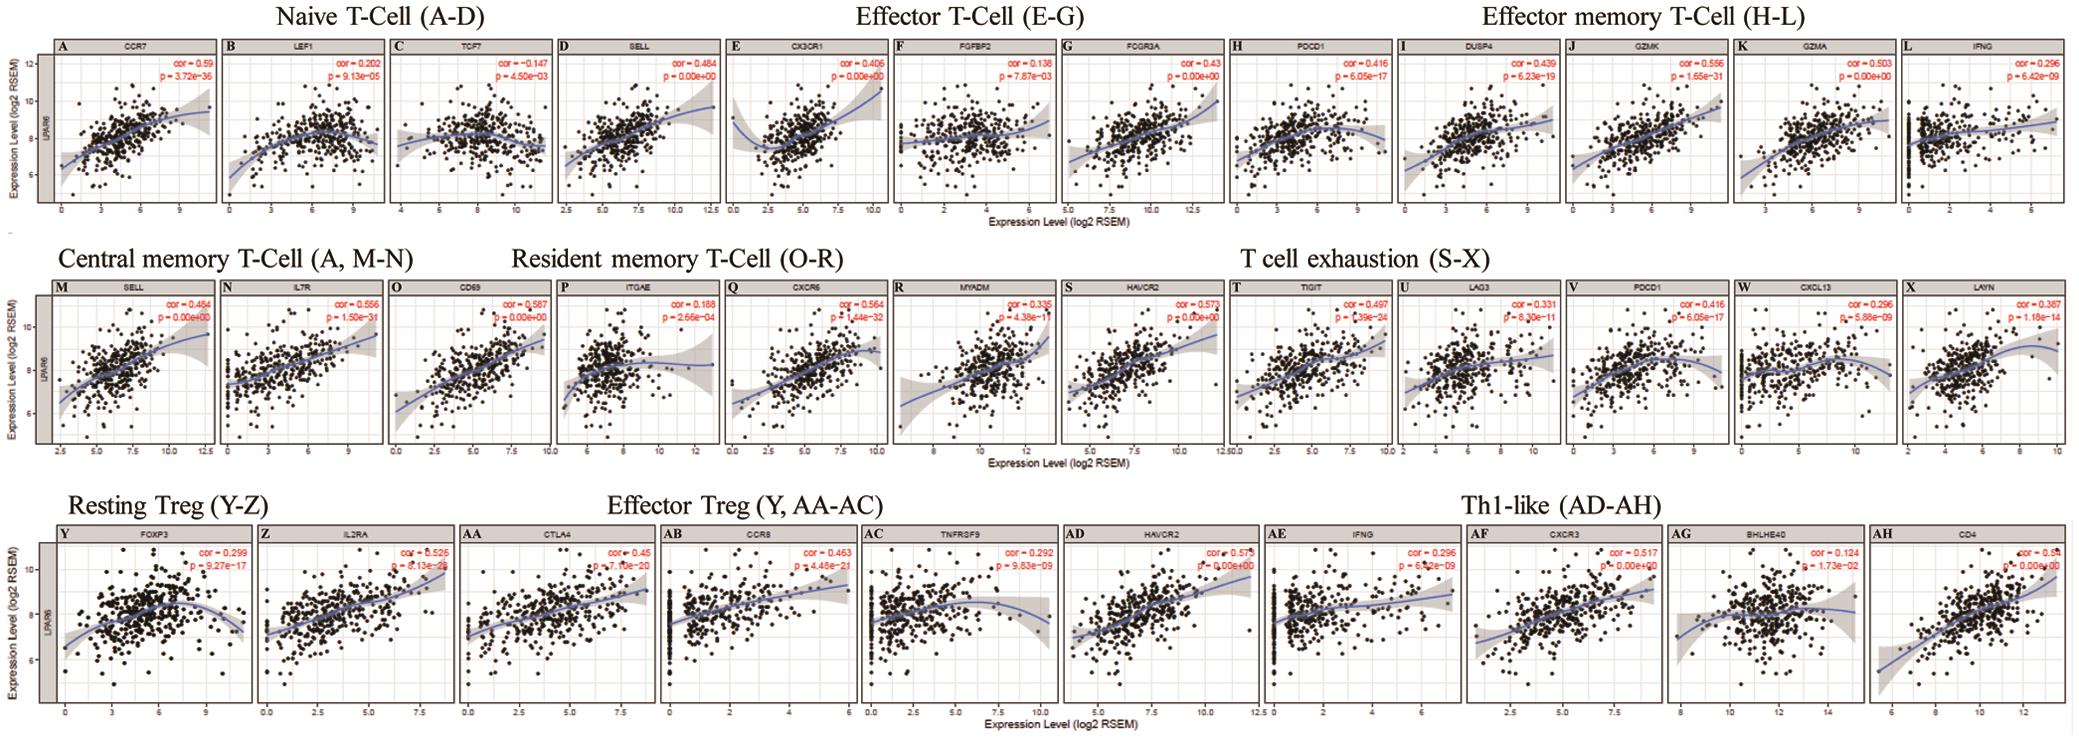 Correlation analysis between LPAR6 expression and various T cell marker sets in HCC.